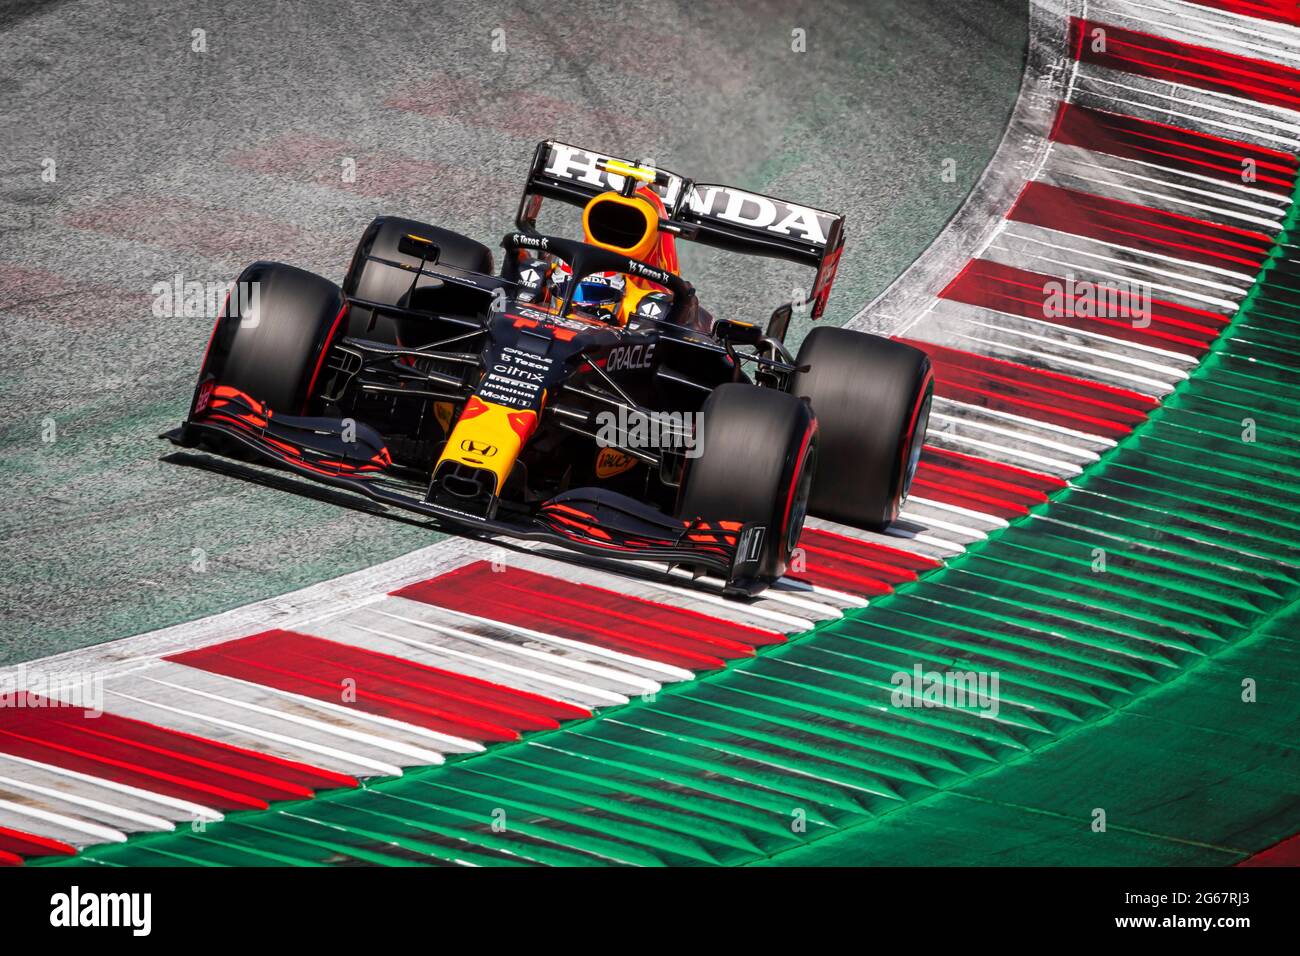 Spielberg, Austria. 03rd July, 2021. Red Bull Racing's Mexican driver  Sergio Perez competes during the qualifying session of the Austrian F1  Grand Prix at the Red Bull Ring in Spielberg. Credit: SOPA